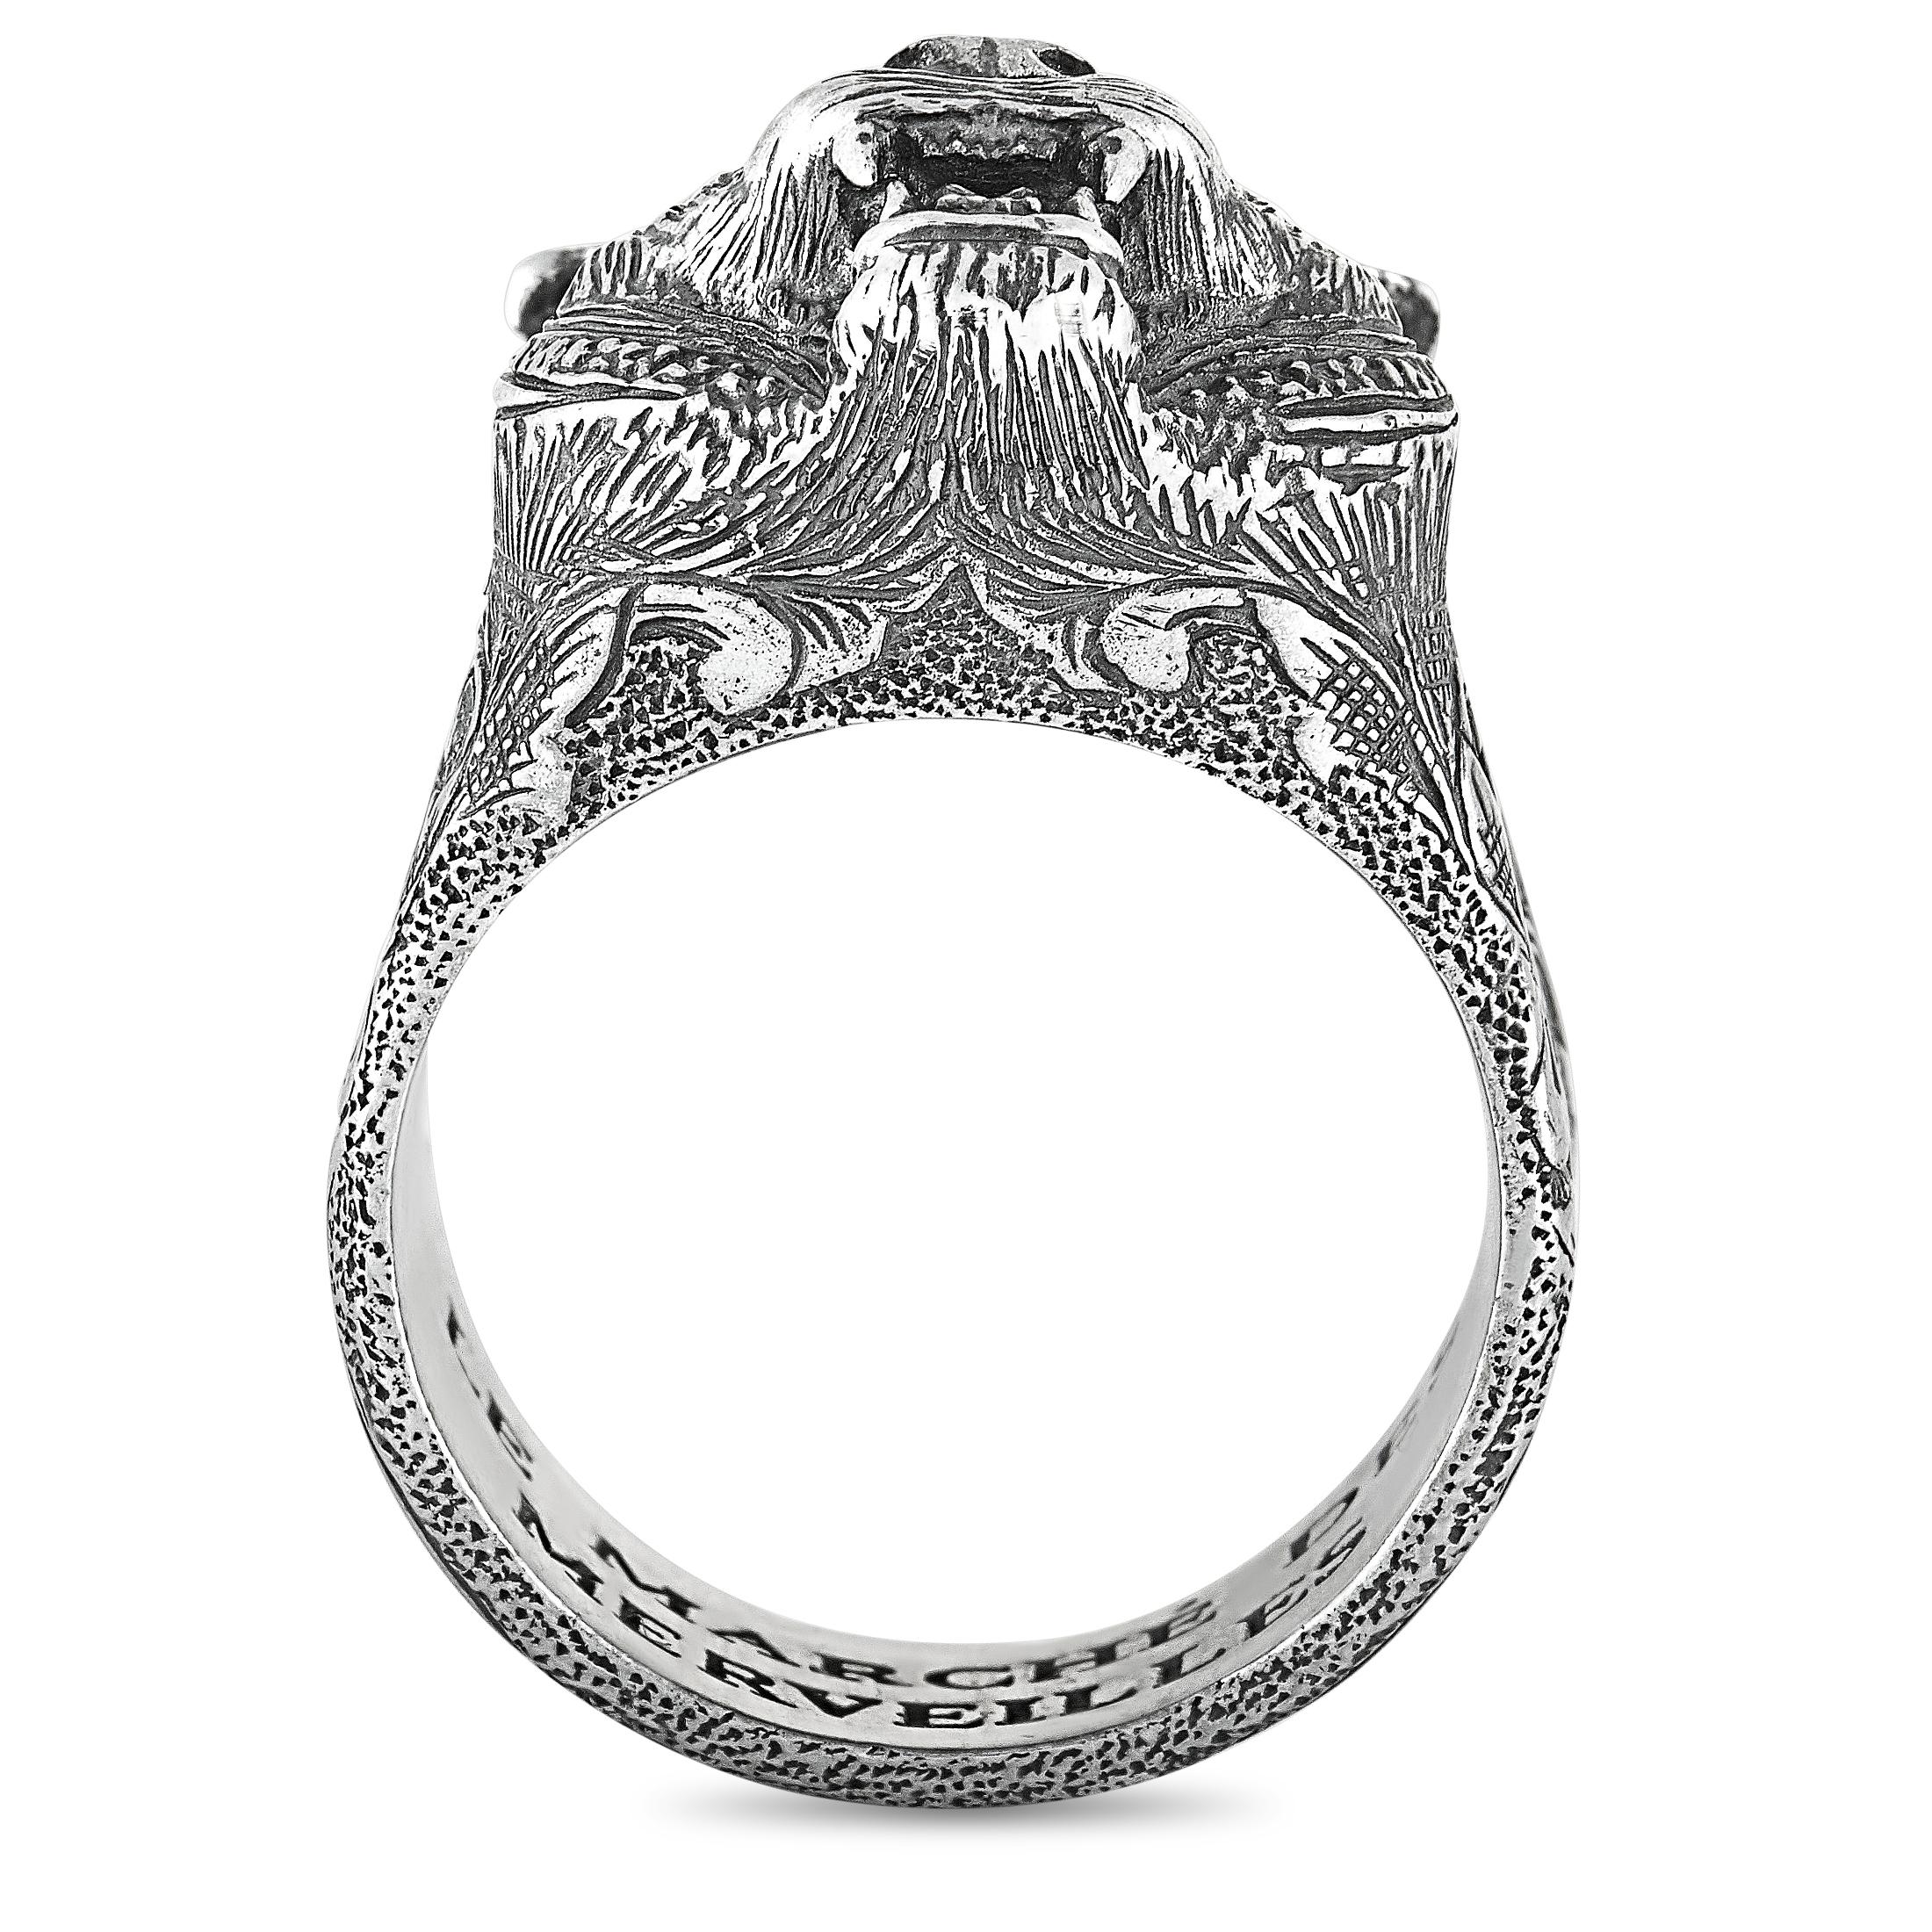 The Gucci “Garden” ring is crafted from silver and set with purple zircons. The ring weighs 18.9 grams and boasts band thickness of 7 mm and top height of 12 mm, while top dimensions measure 16 by 19 mm.
 
 This item is offered in brand new